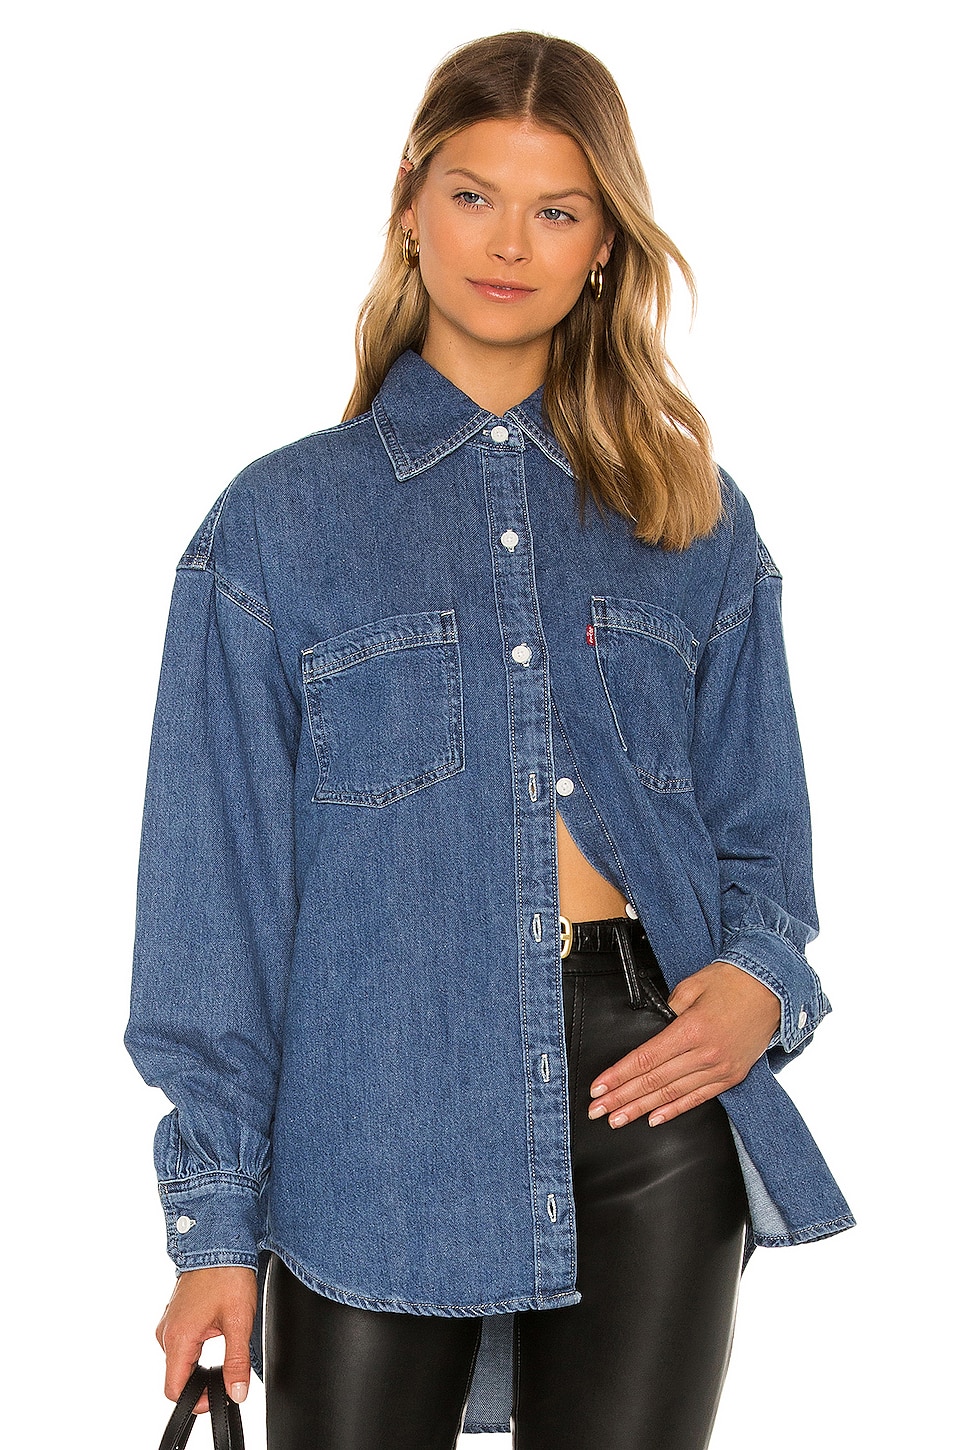 LEVI'S Remi Utility Shirt in Quite Frankly | REVOLVE